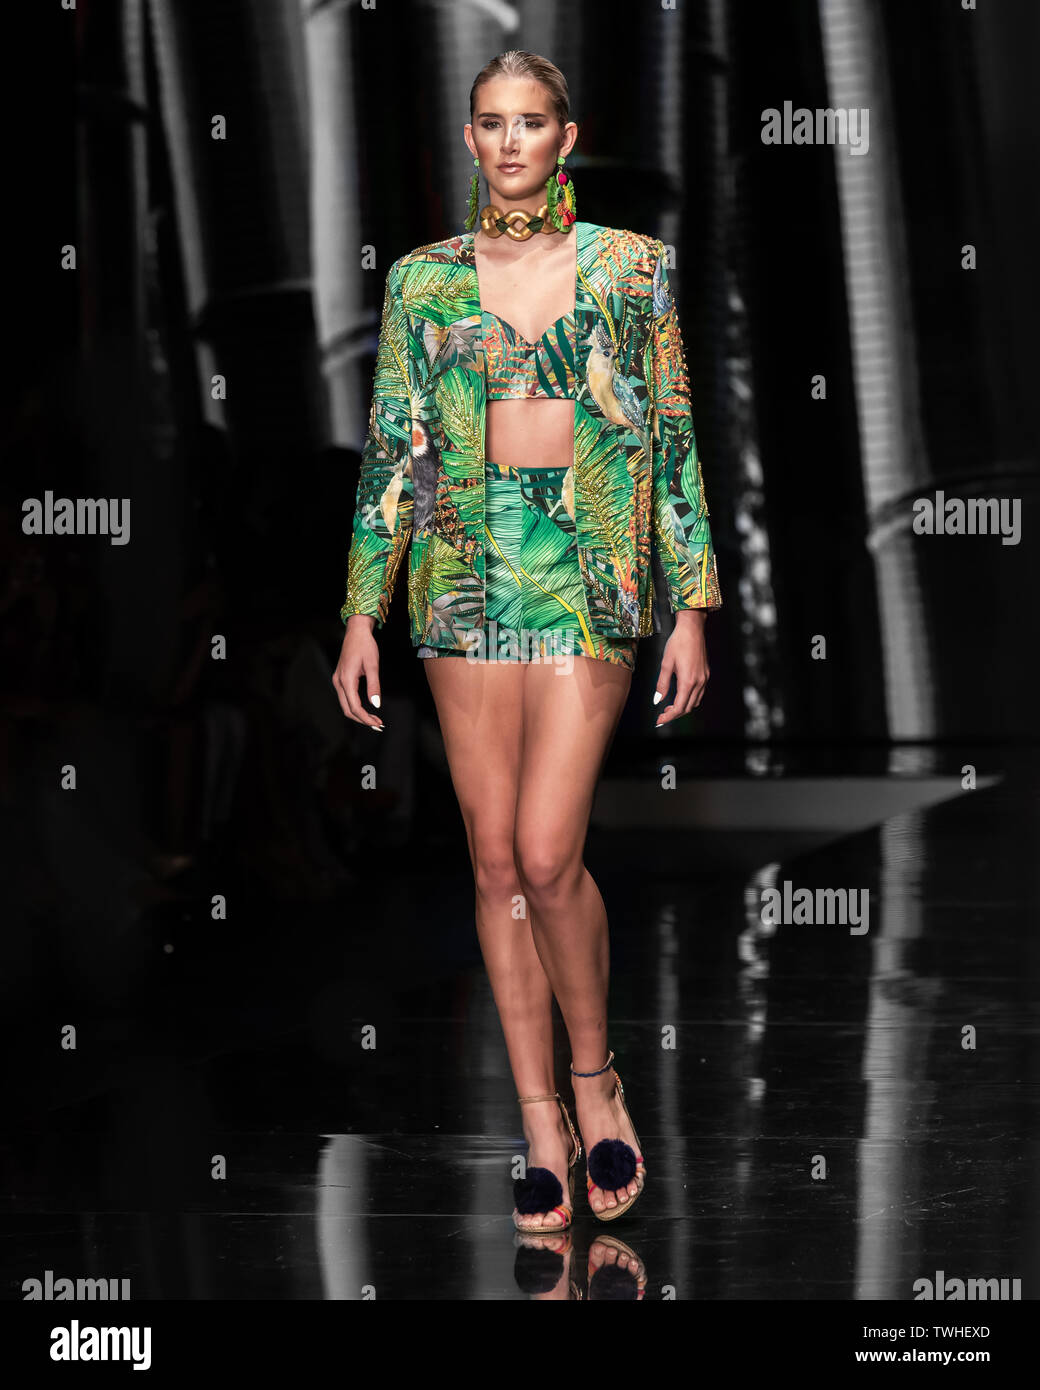 VERSACE WOMEN'S SPRING-SUMMER 2020 COLLECTION